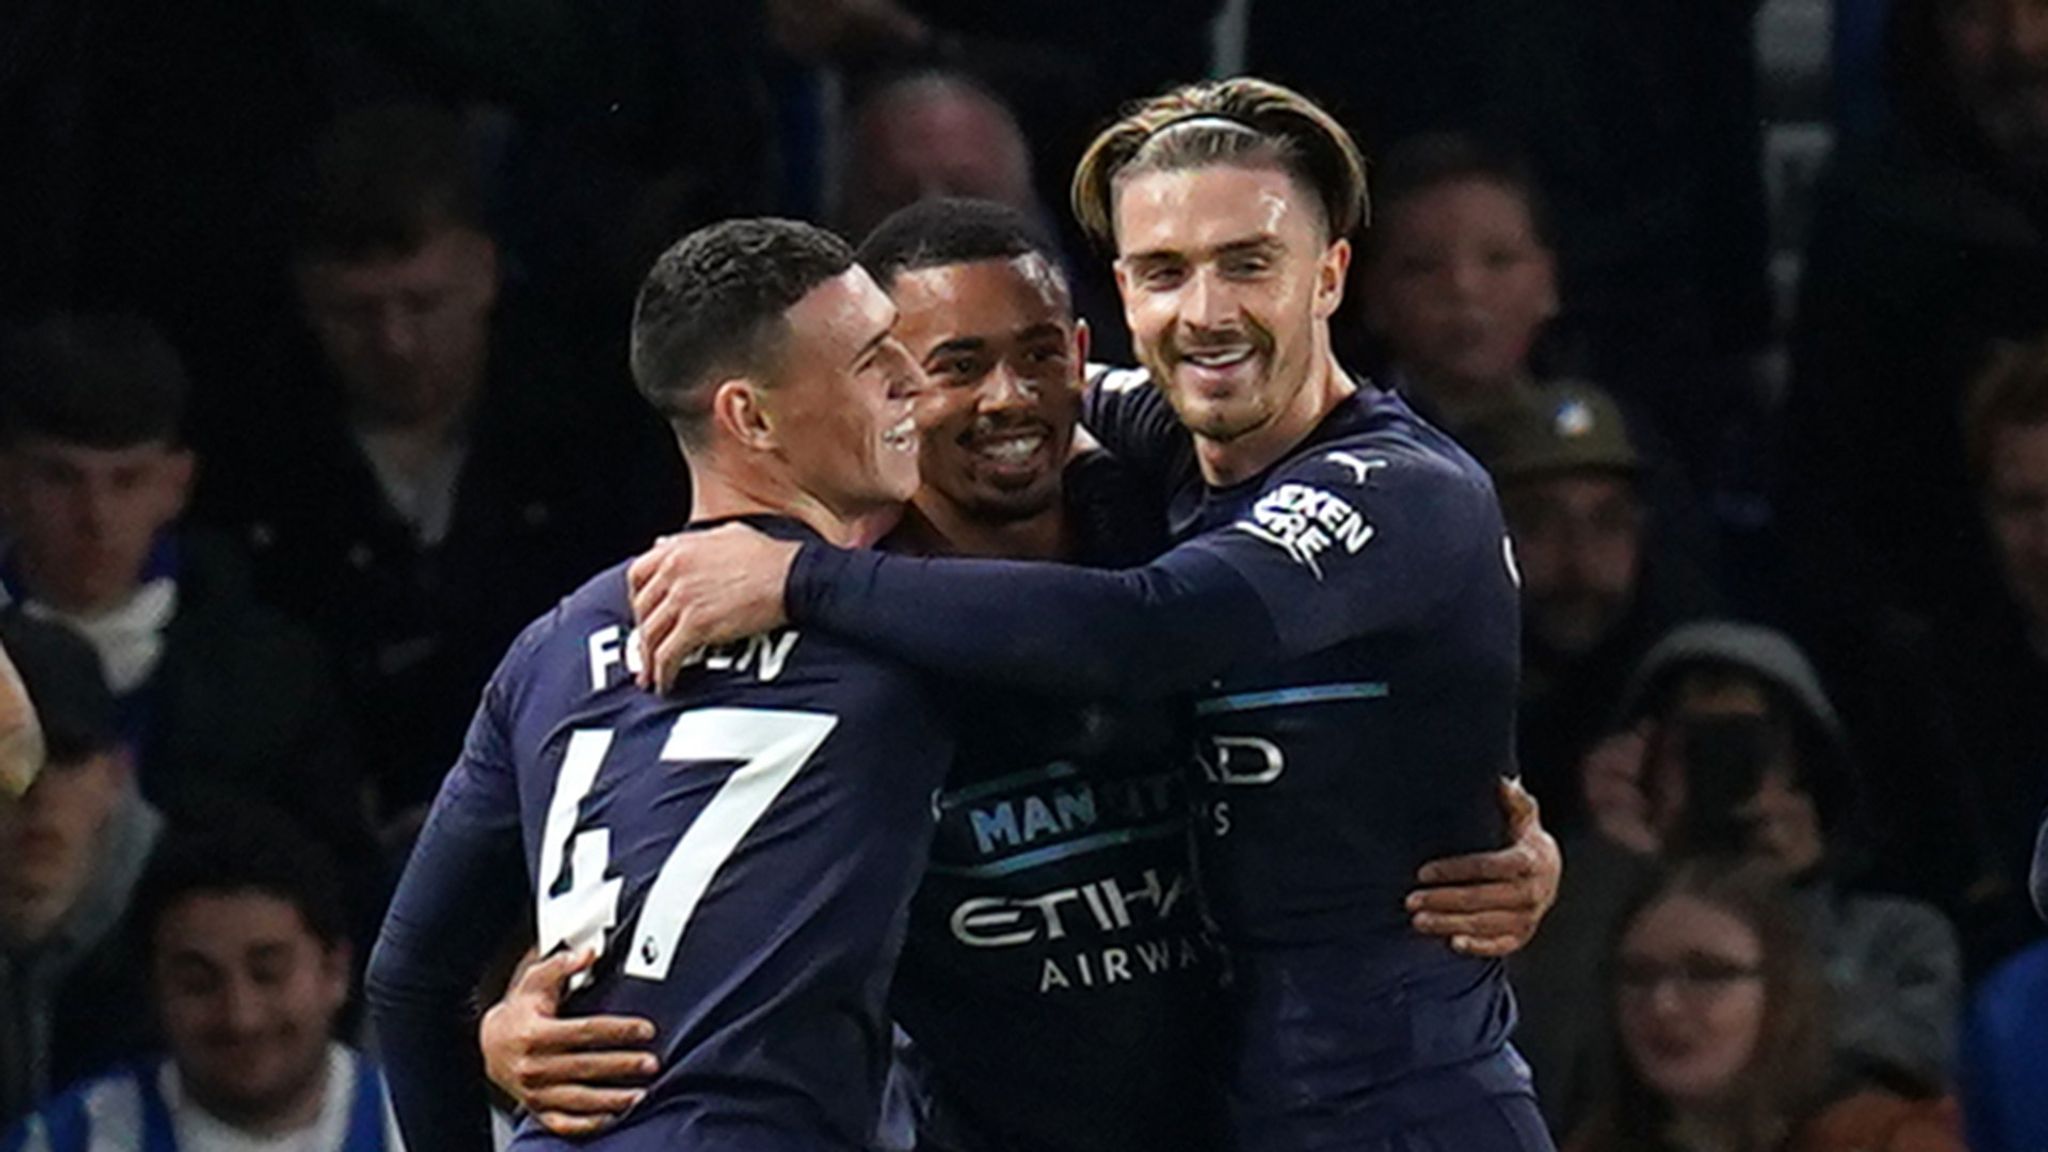 Brighton 1-4 Manchester City Phil Foden at the double as City turn on the style Football News Sky Sports